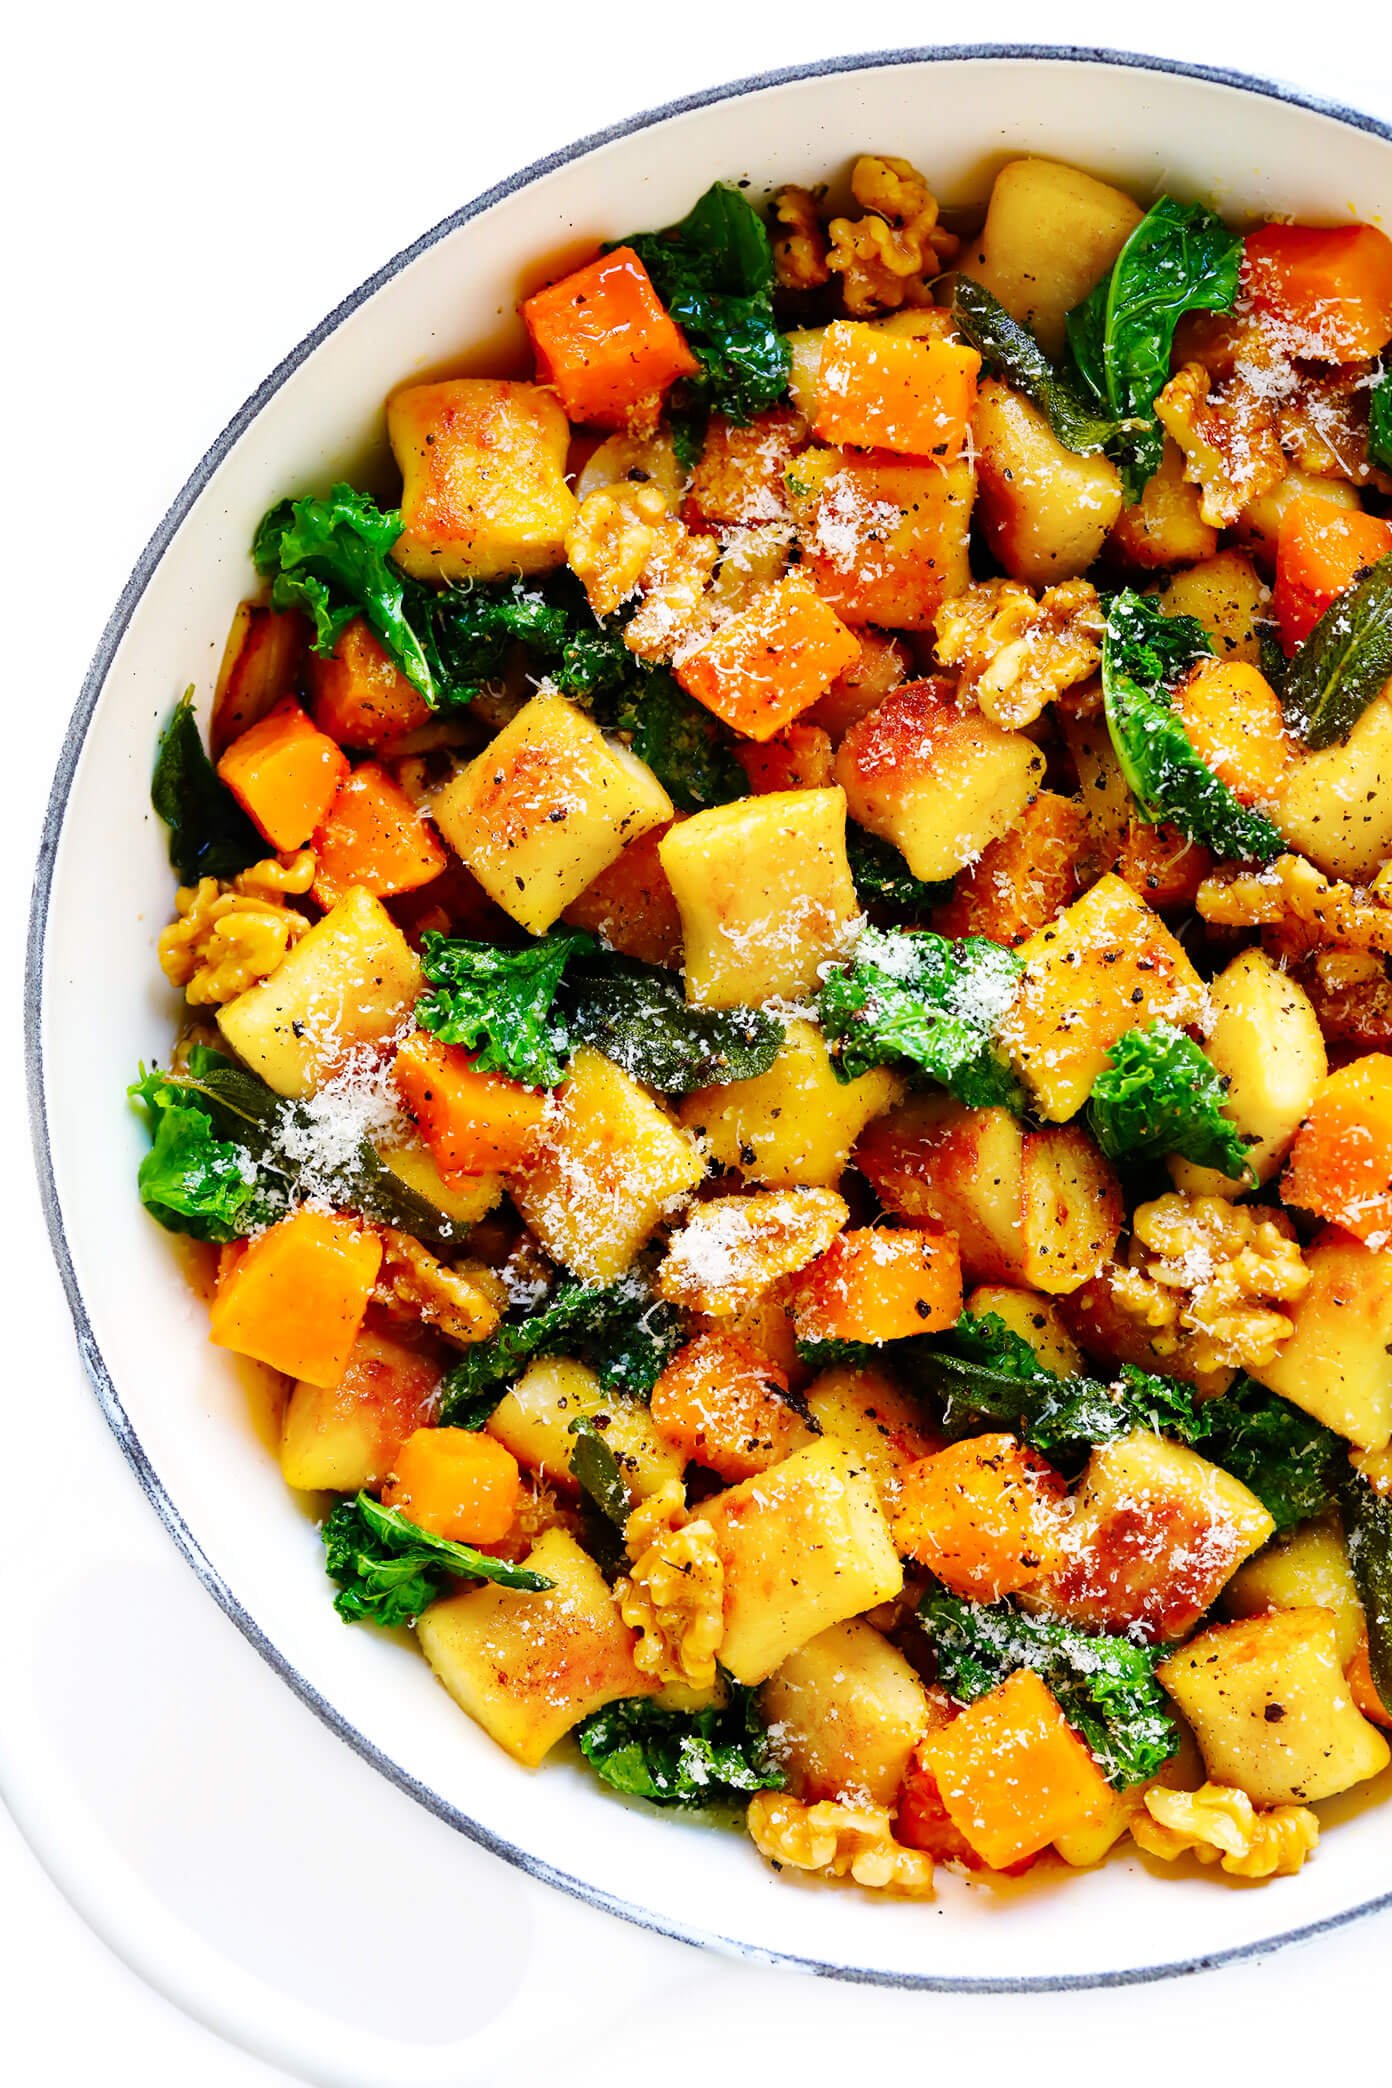 Gnocchi with Butternut Squash, Kale, Parmesan and Sage Brown Butter Sauce